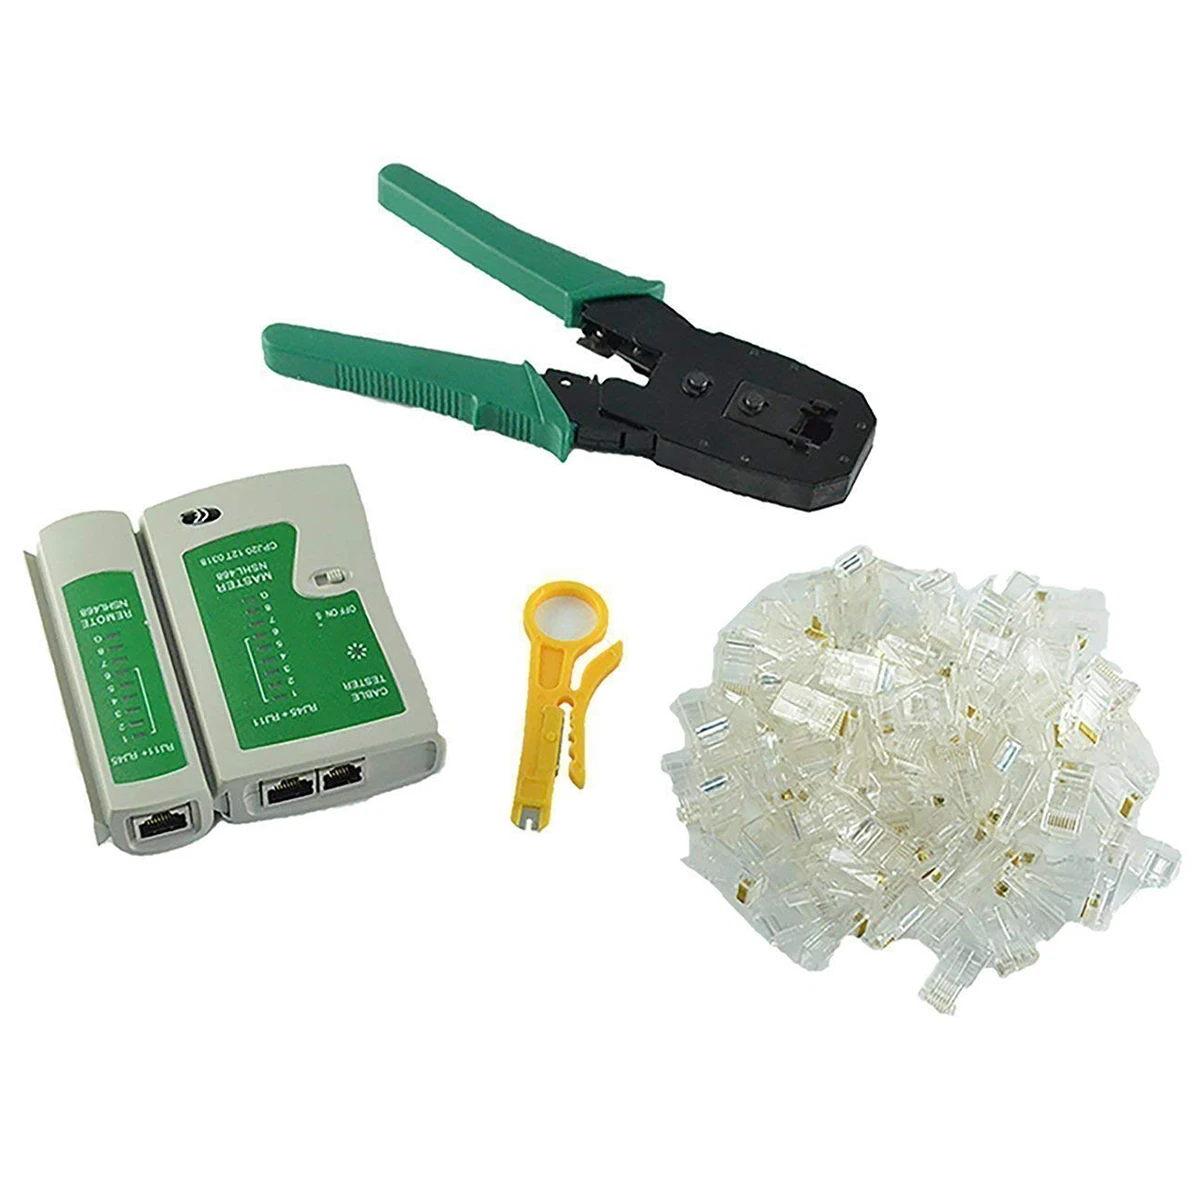 

Network Ethernet LAN Kit 4 in 1 Cable Tester +Crimping Plier Crimper + Wire Stripper +100x Rj45 Cat5 Cat5e Connector Plug Netw